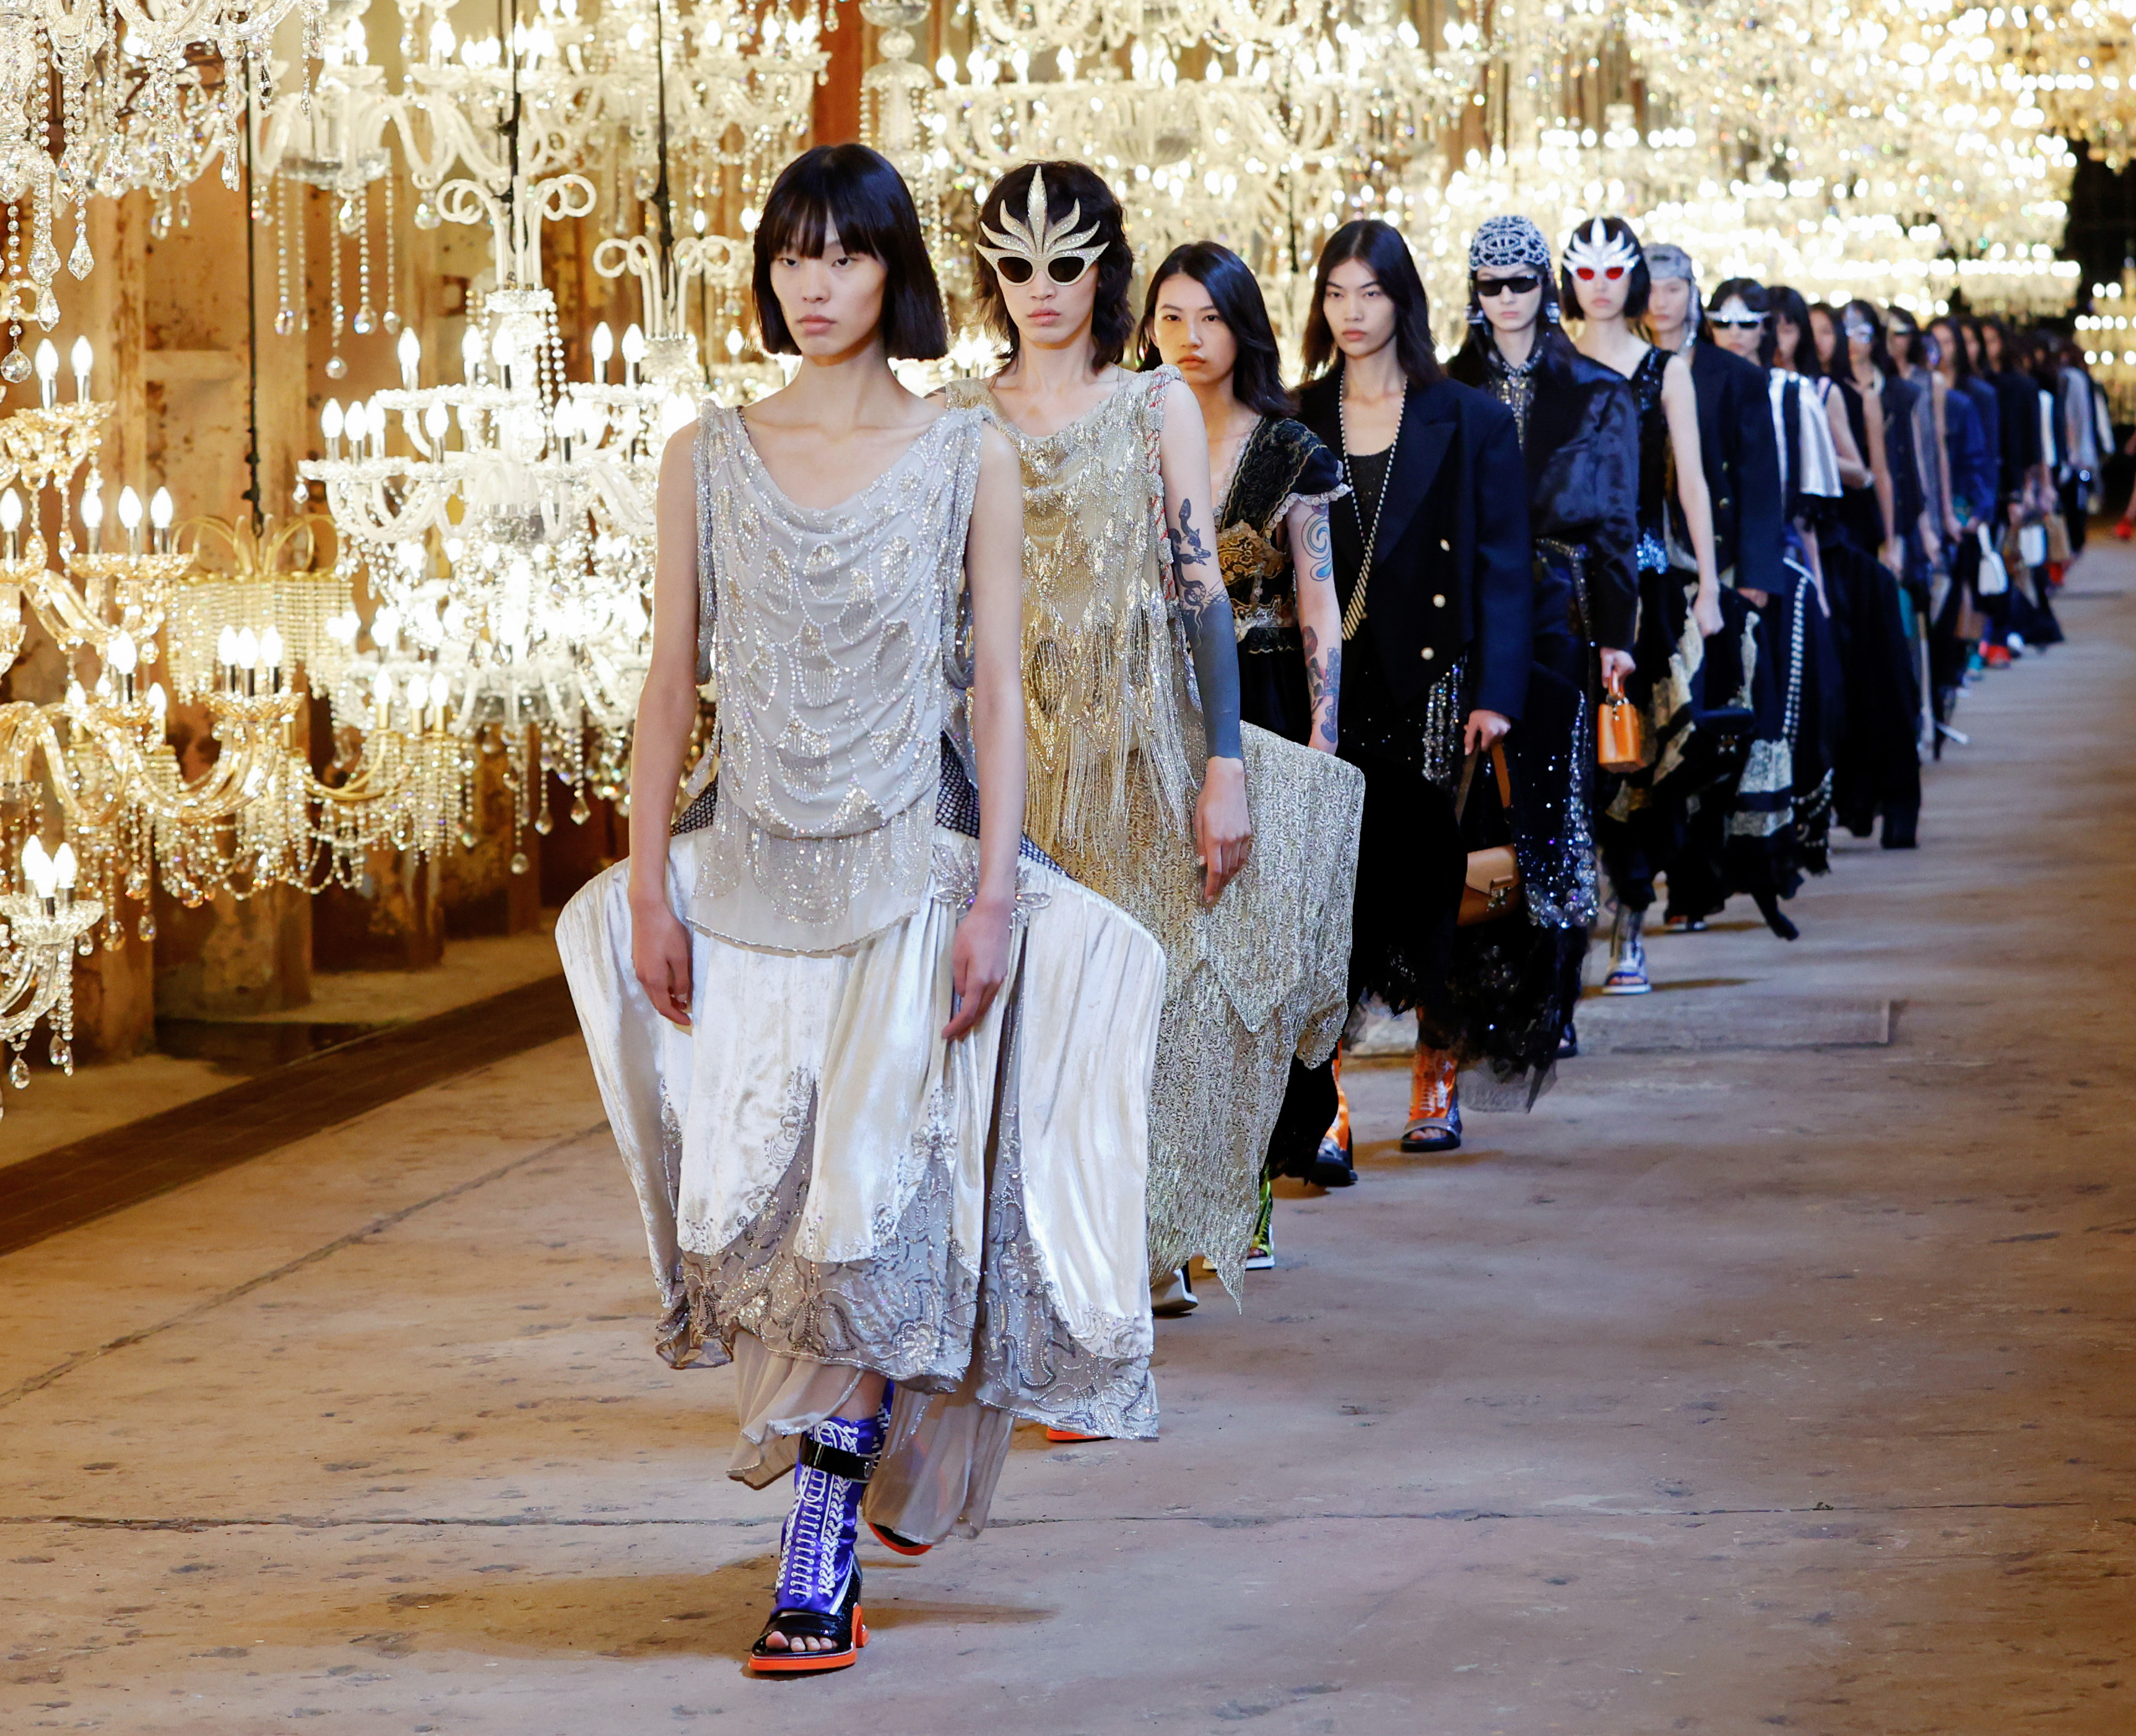 Louis Vuitton's Shanghai Campaign: Merging Luxury, Local Tides and China's  Middle Class<br/>